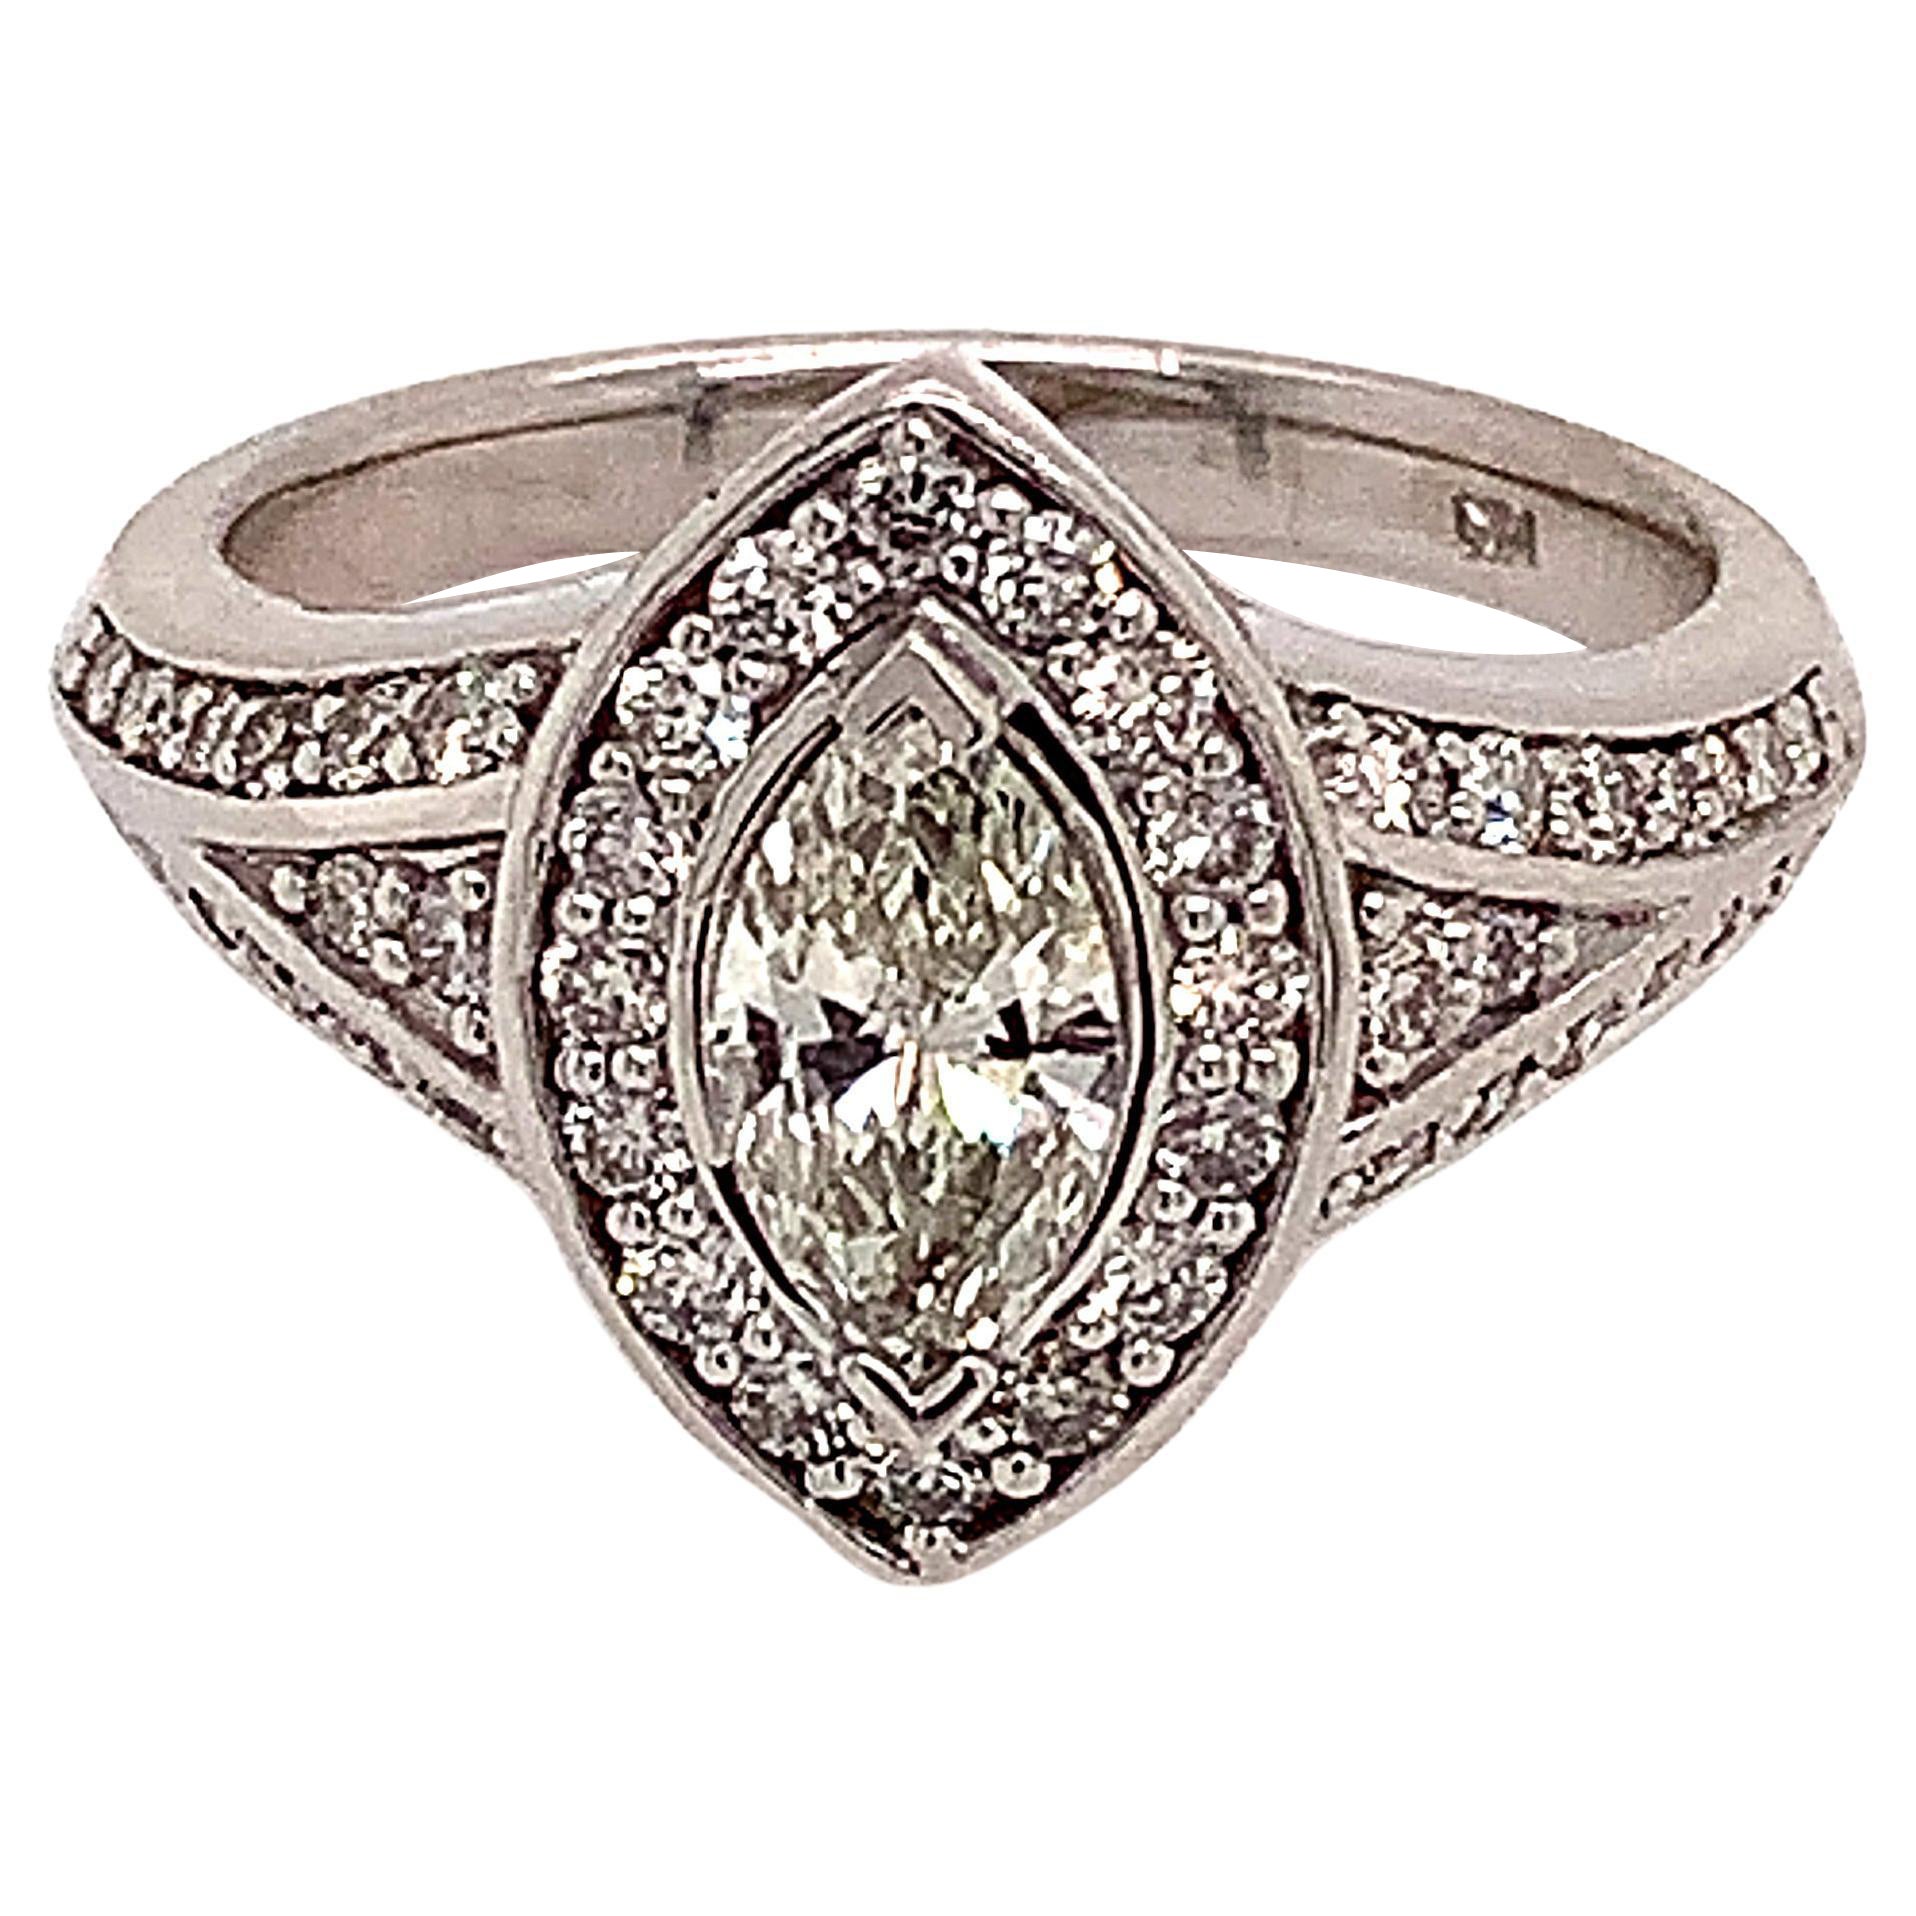 Diamond Ring 14k White Gold 0.45 TCW 4.88g Certified For Sale